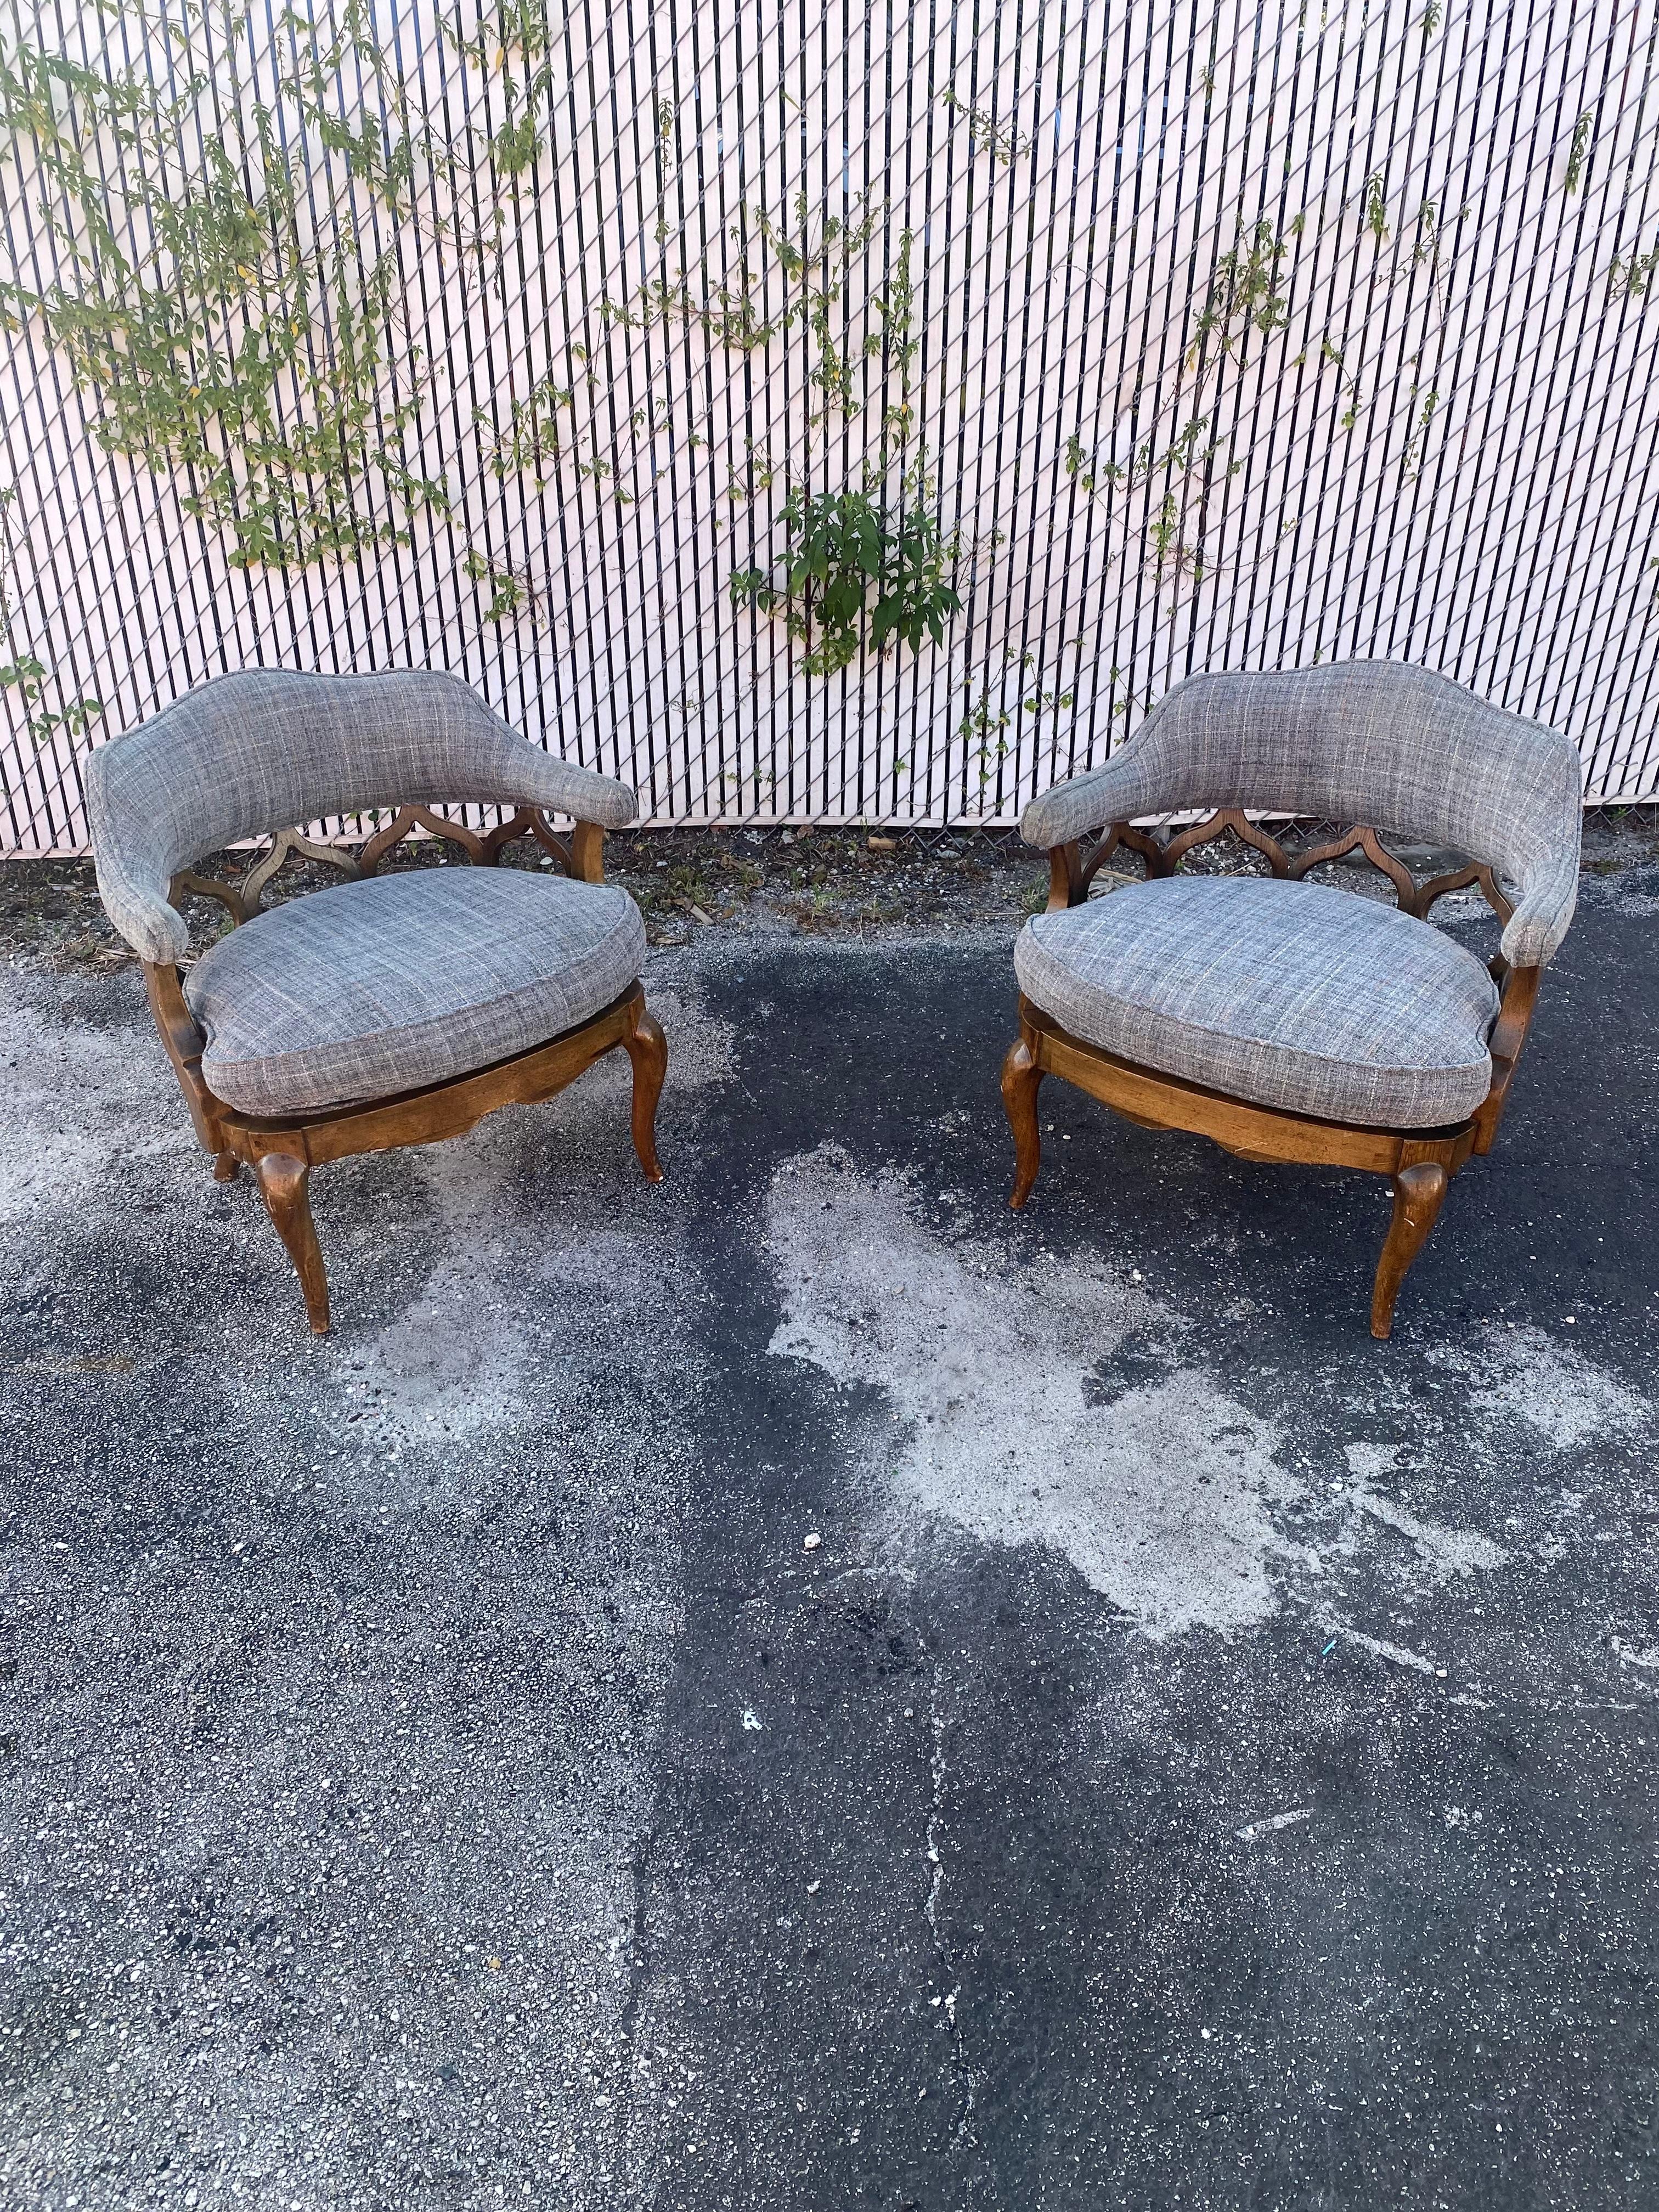 1970s  Mid Century Sculptural Curved Barrel Tweed Wood Chairs, Set of 2 For Sale 3